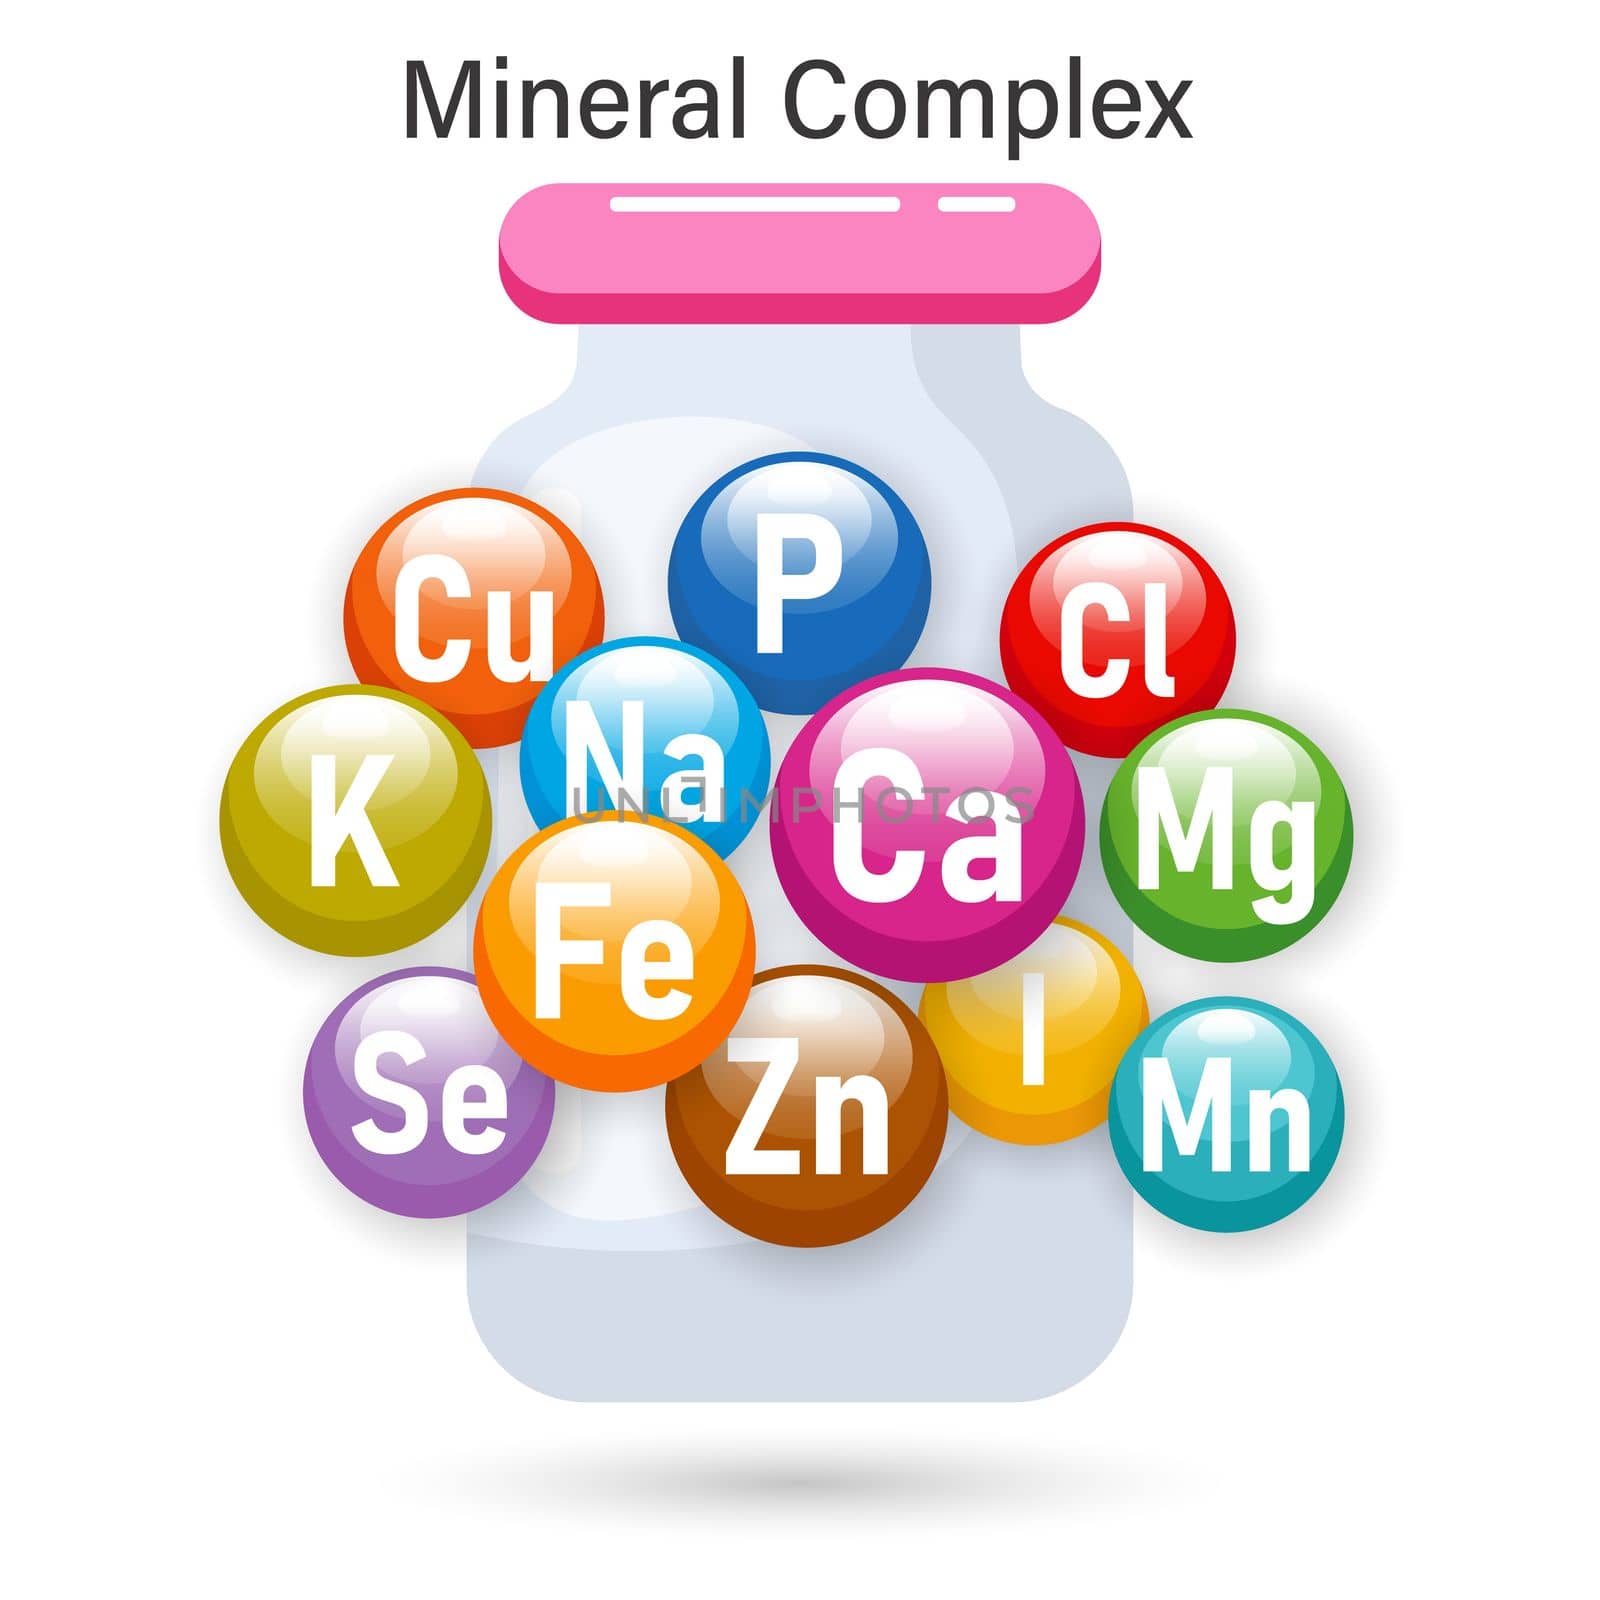 Mineral complex of healthy nutrition. Illustration of mineral icons in a medicinal vial. The concept of medicine and healthcare.